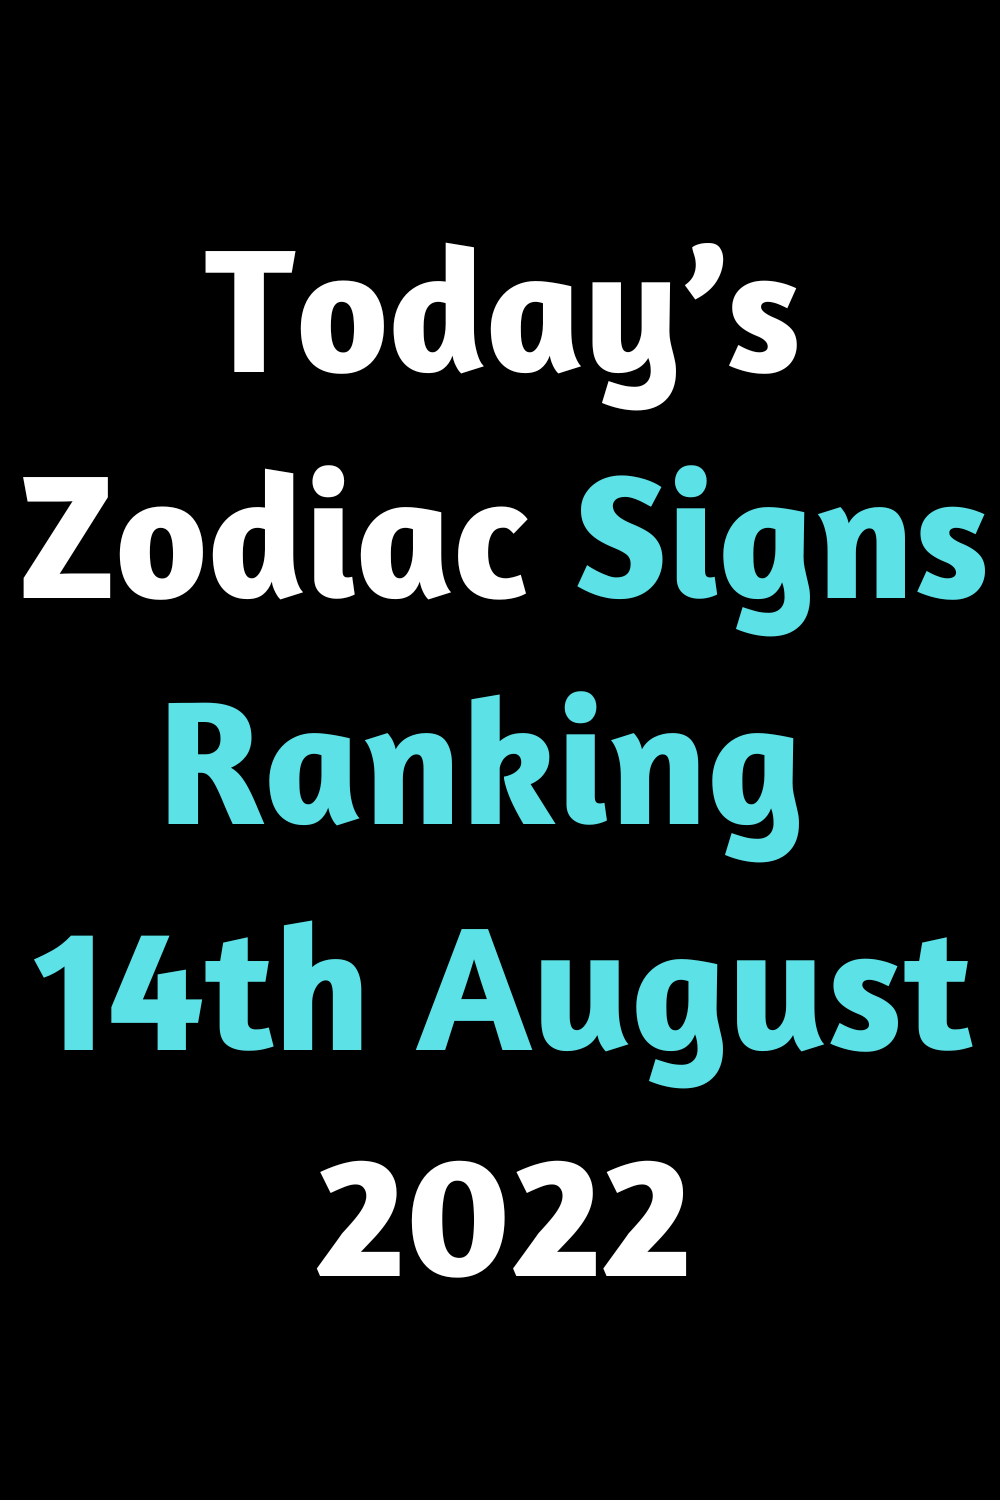 Today’s Zodiac Signs Ranking 14th August 2022